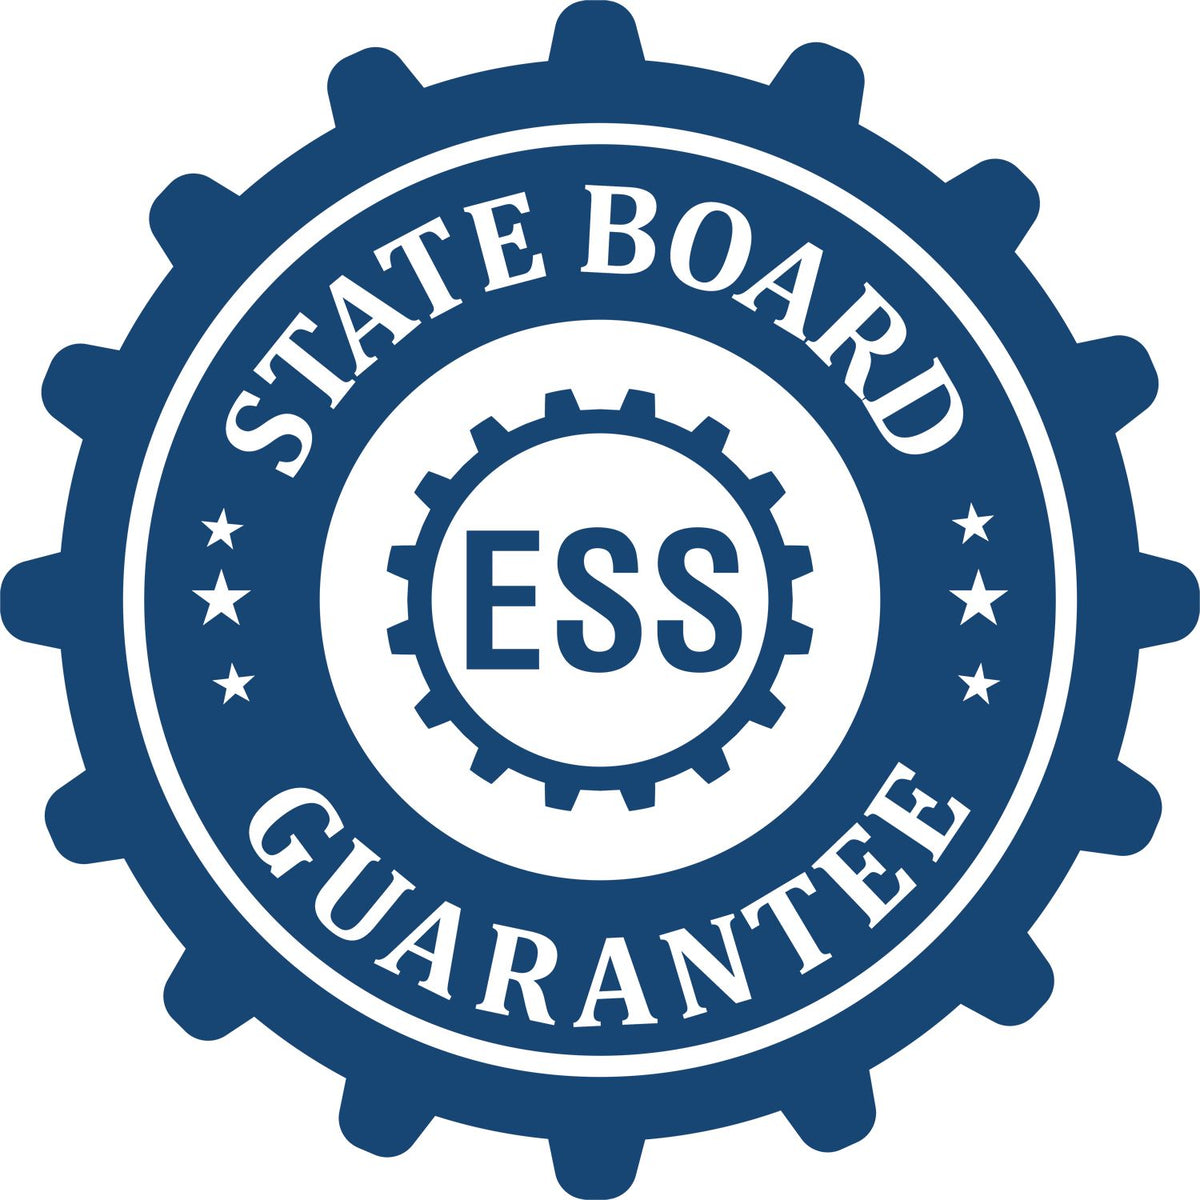 An emblem in a gear shape illustrating a state board guarantee for the Heavy-Duty Idaho Rectangular Notary Stamp product.